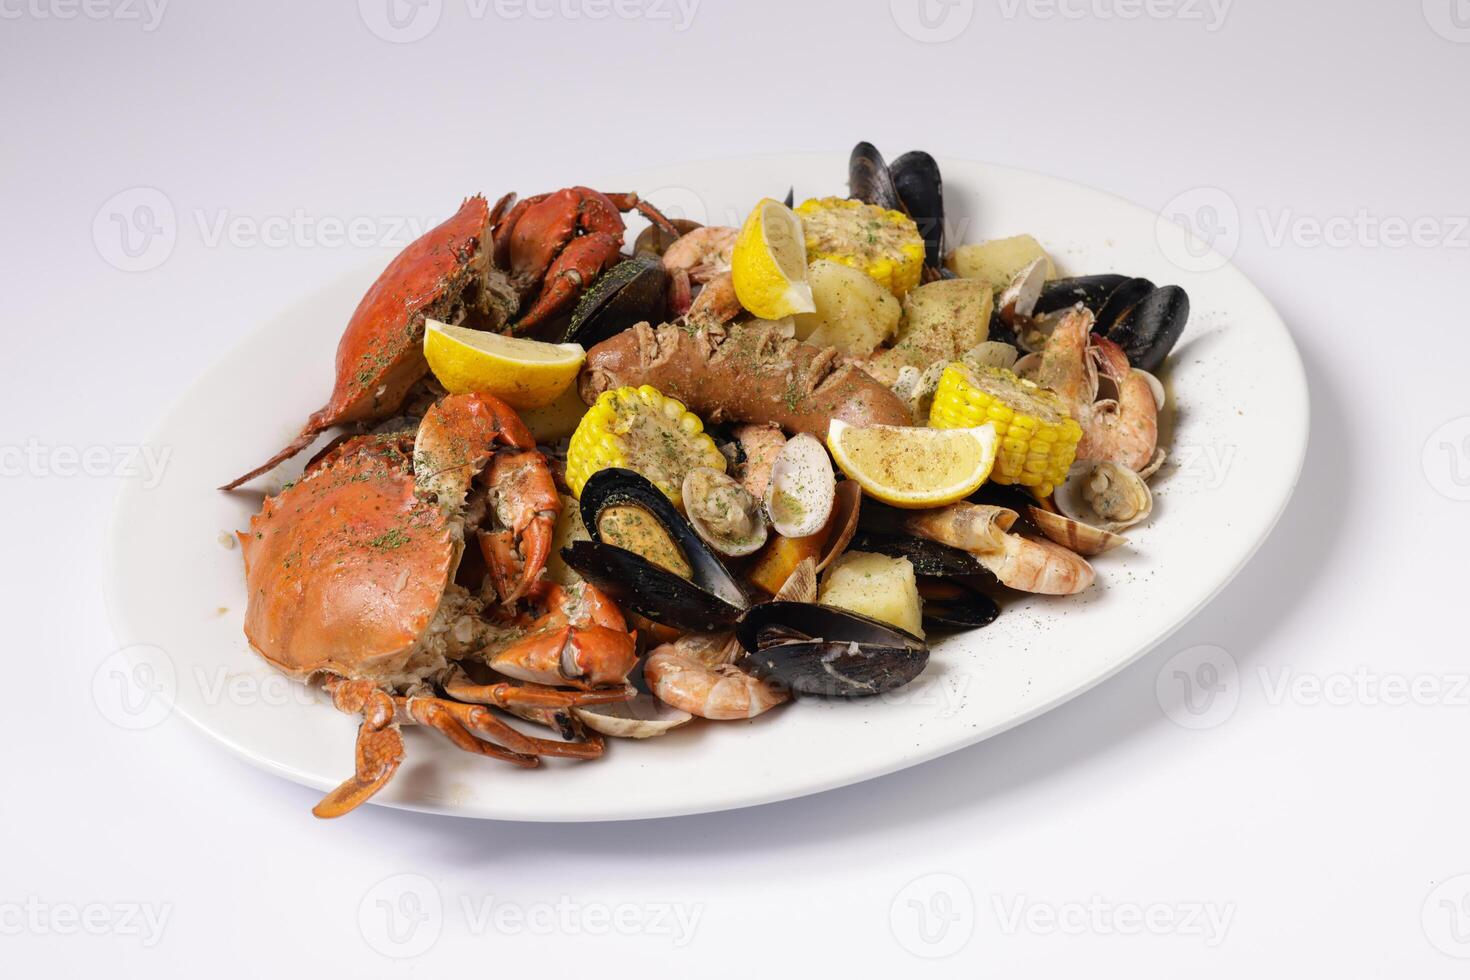 CRAB AND SEAFOOD CLAWDADDY BOIL in a dish top view on grey background singapore food photo